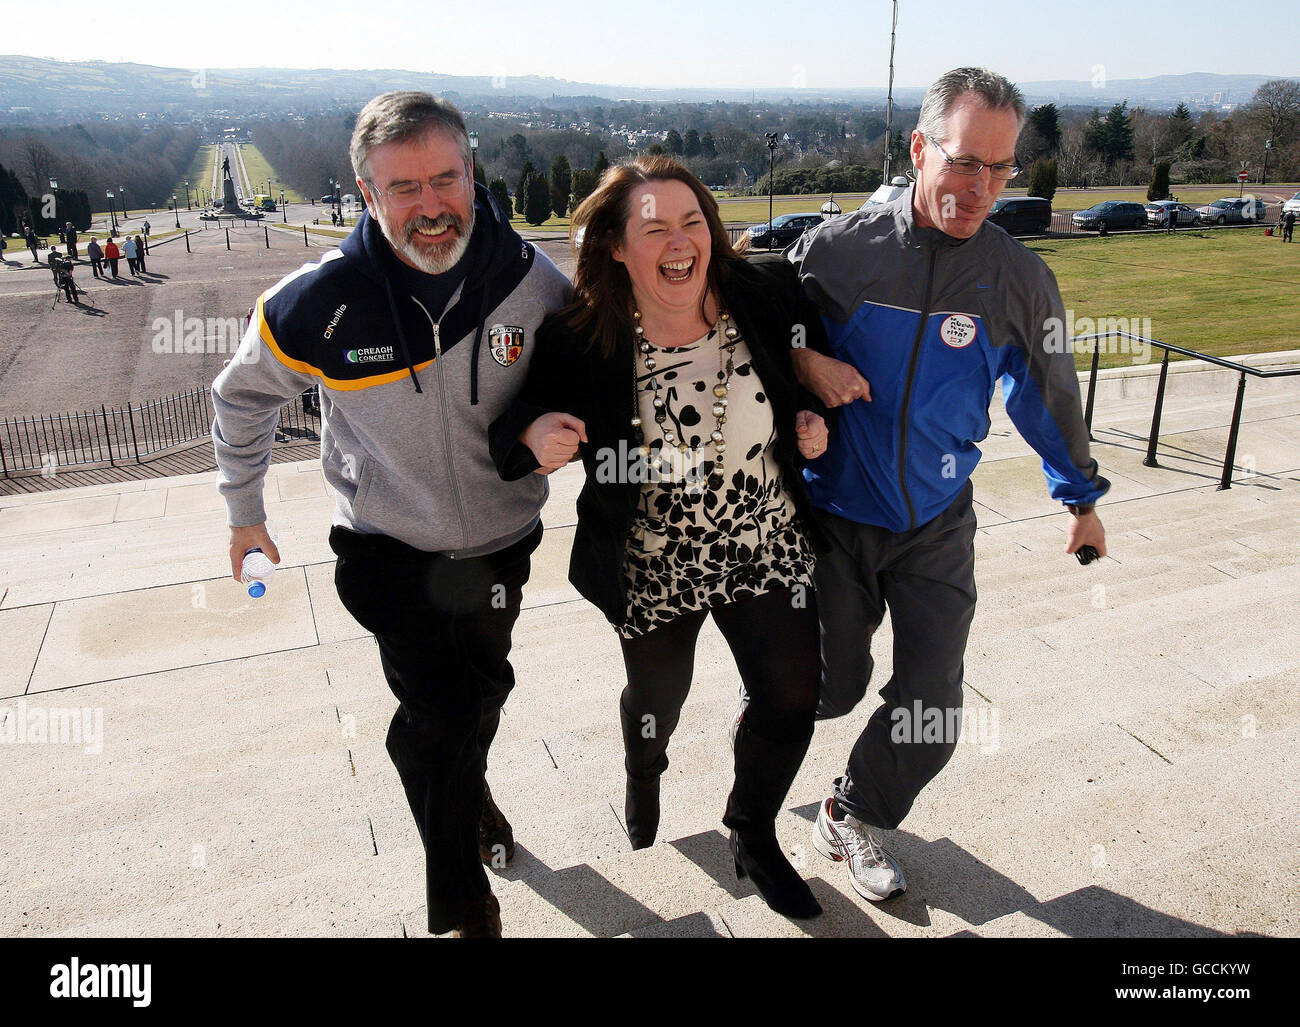 Sinn Fein President Gerry Adams (left) with colleagues Michelle Gildernew and Gerry Kelly, at a fun run at Stormont, to promote the Irish language, during a break in the Policing and Justice debate. Stock Photo